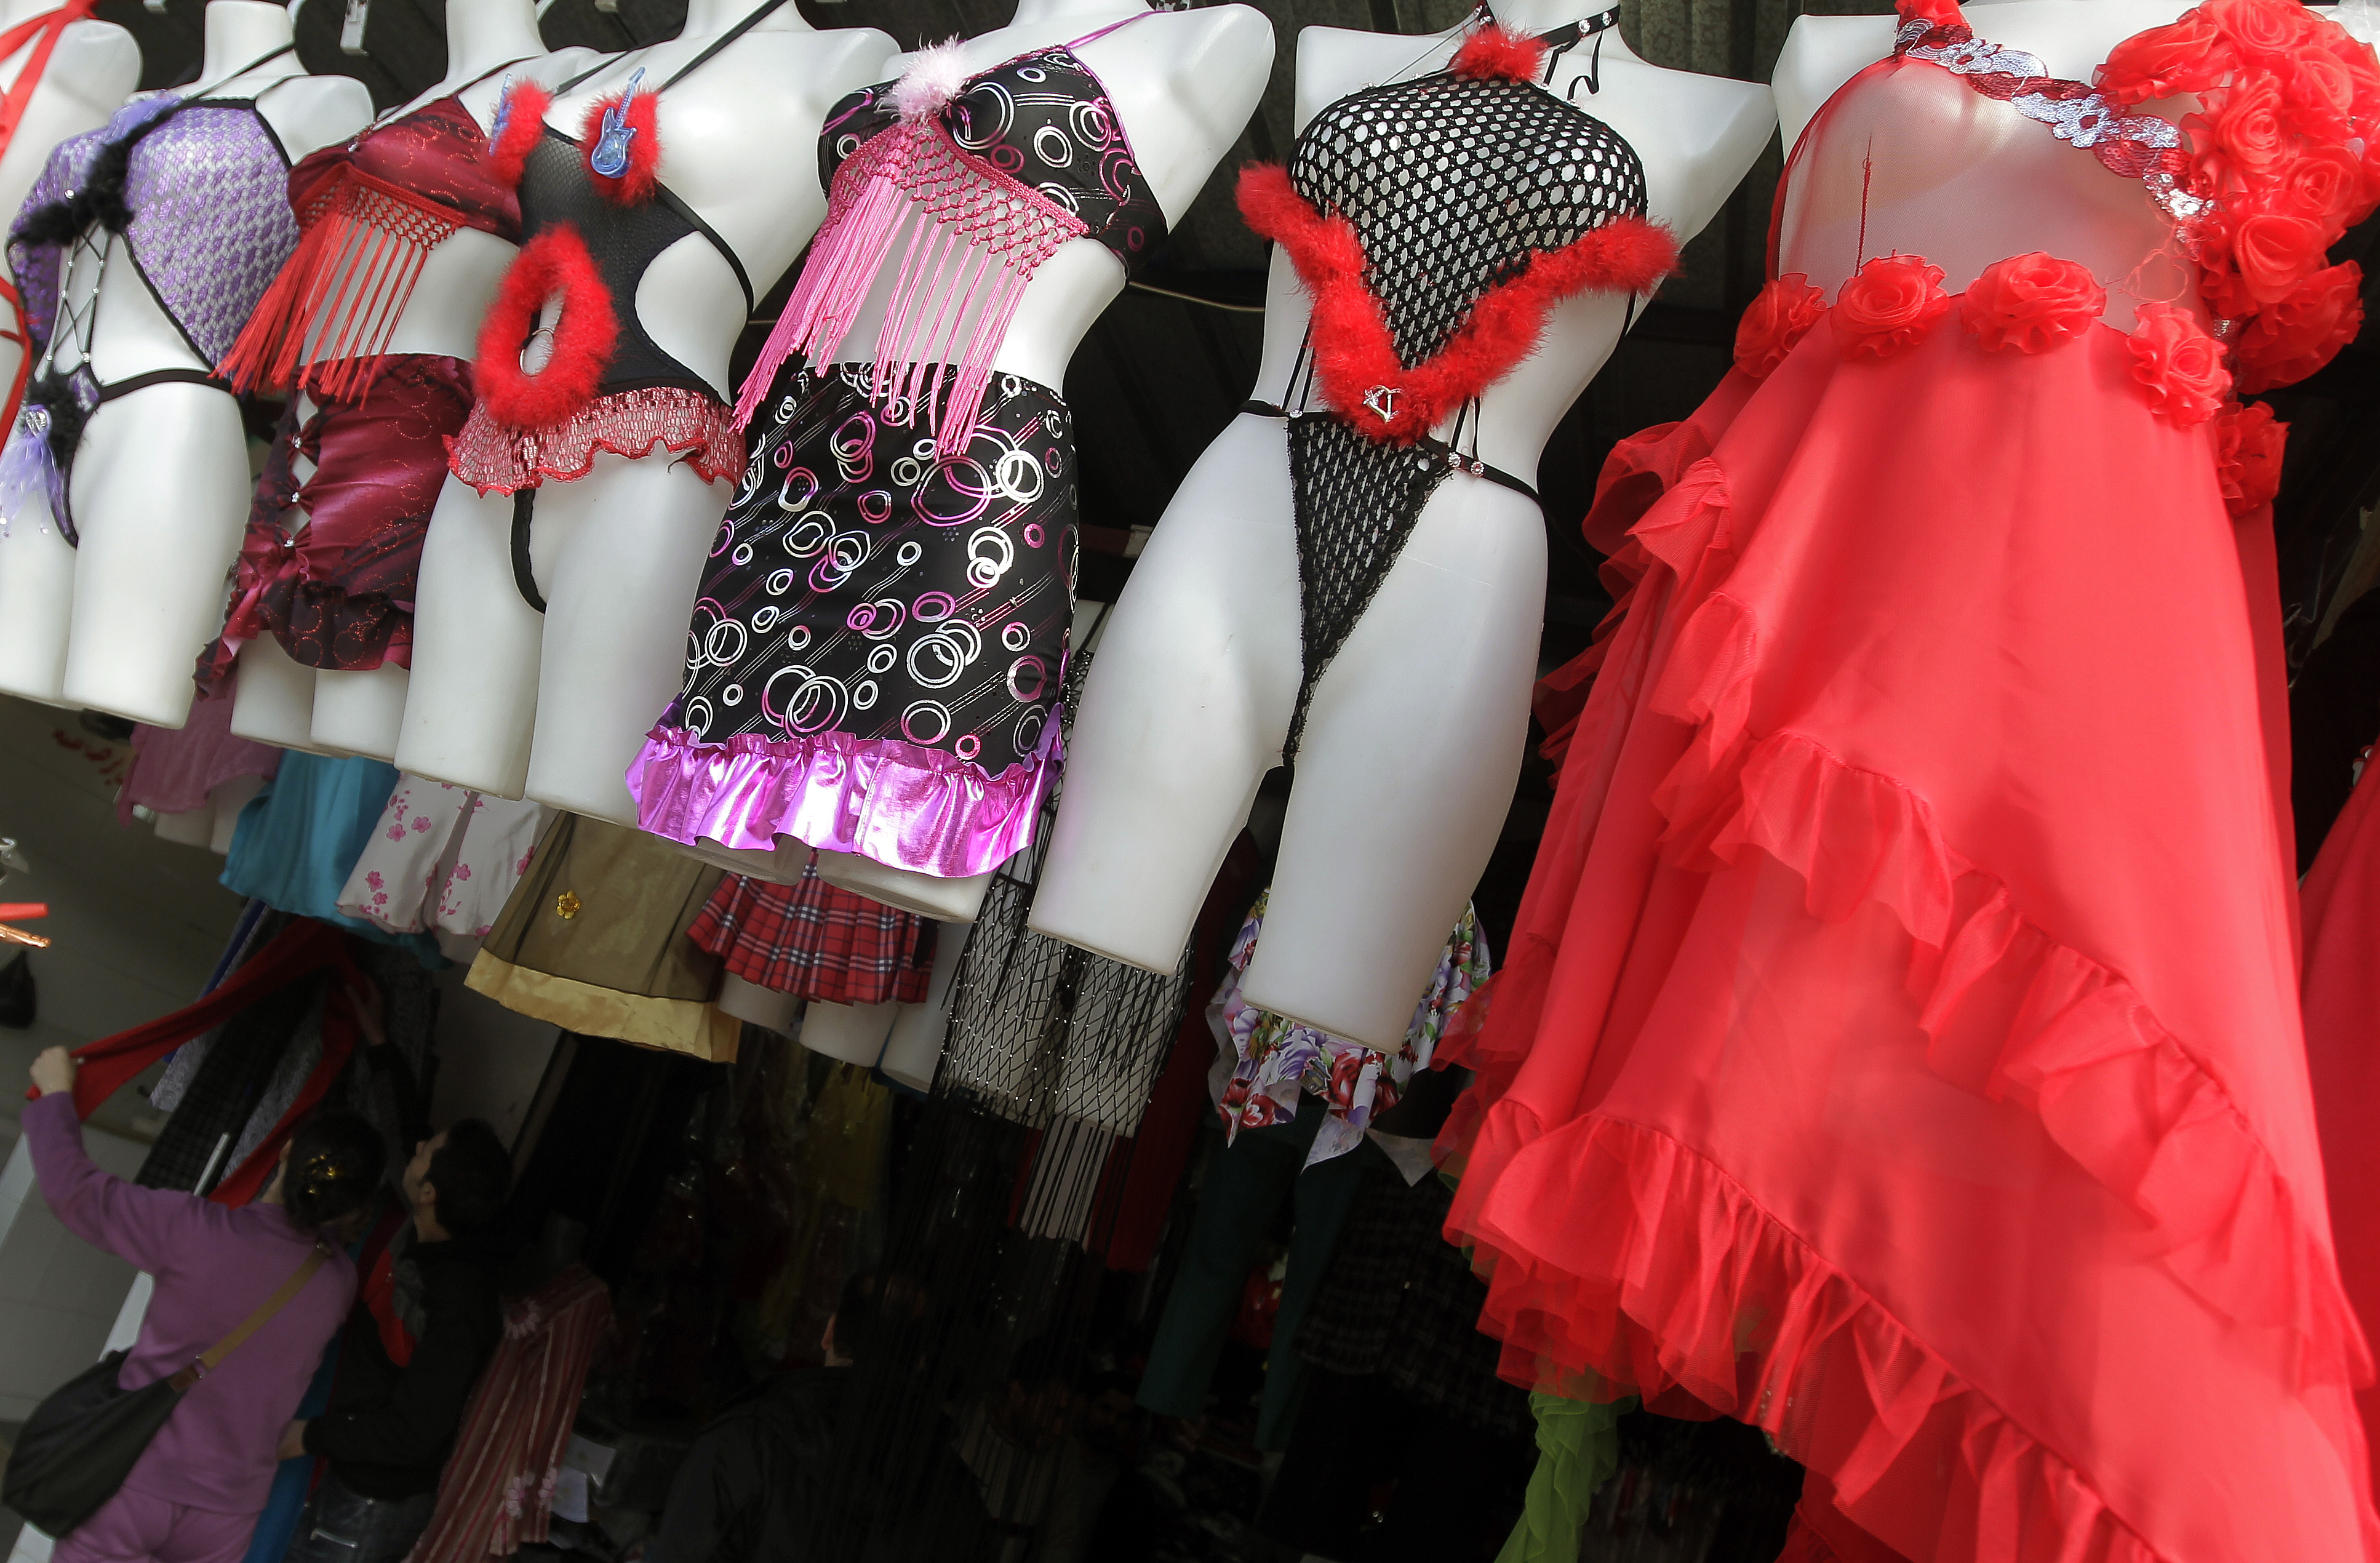 Underwear and lingerie shop in LOS ANGELES at 8500 BEVERLY BLVD STE 673